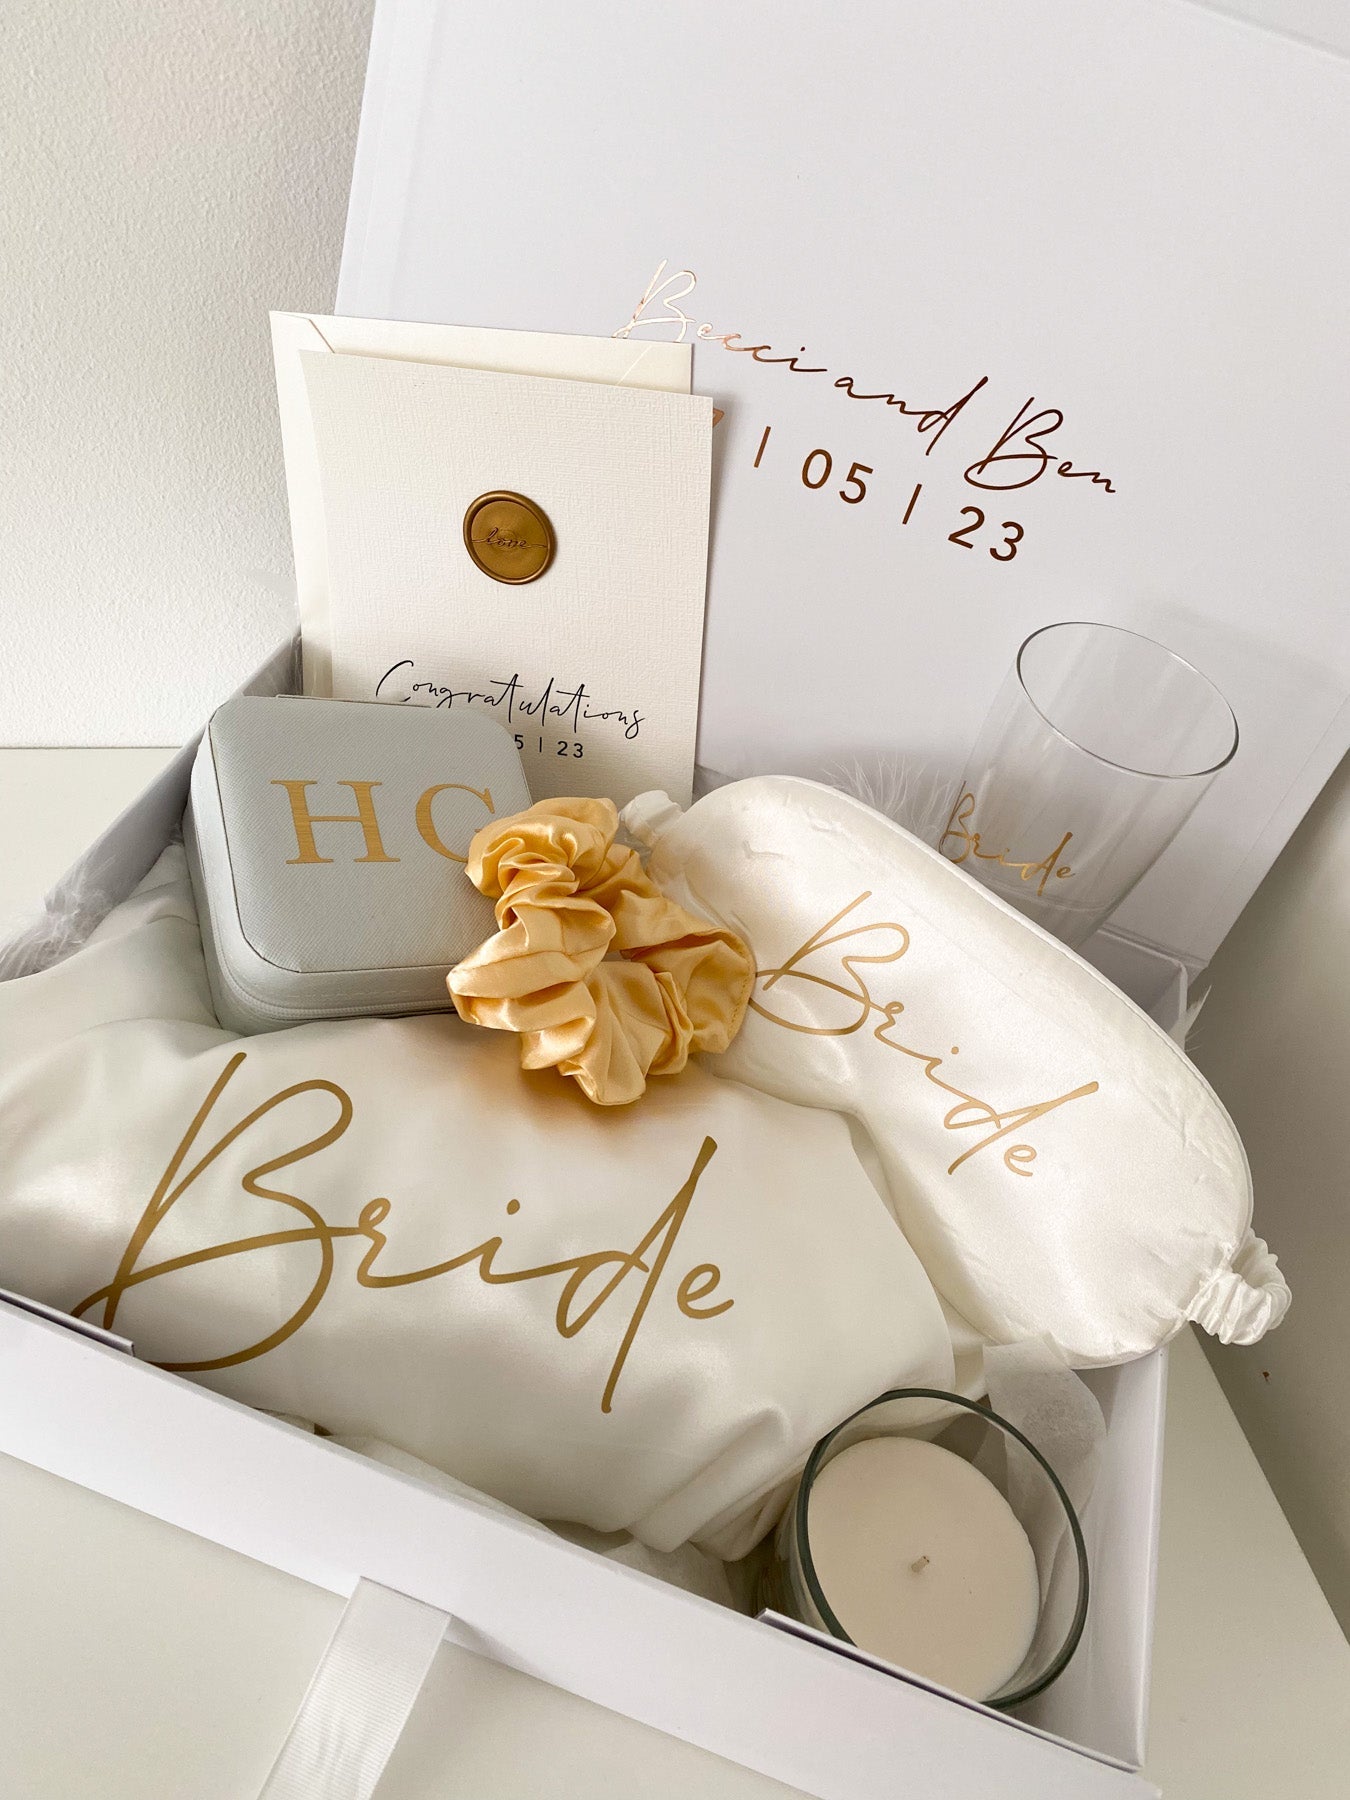 Gift for Bride – Between Boxes Gifts